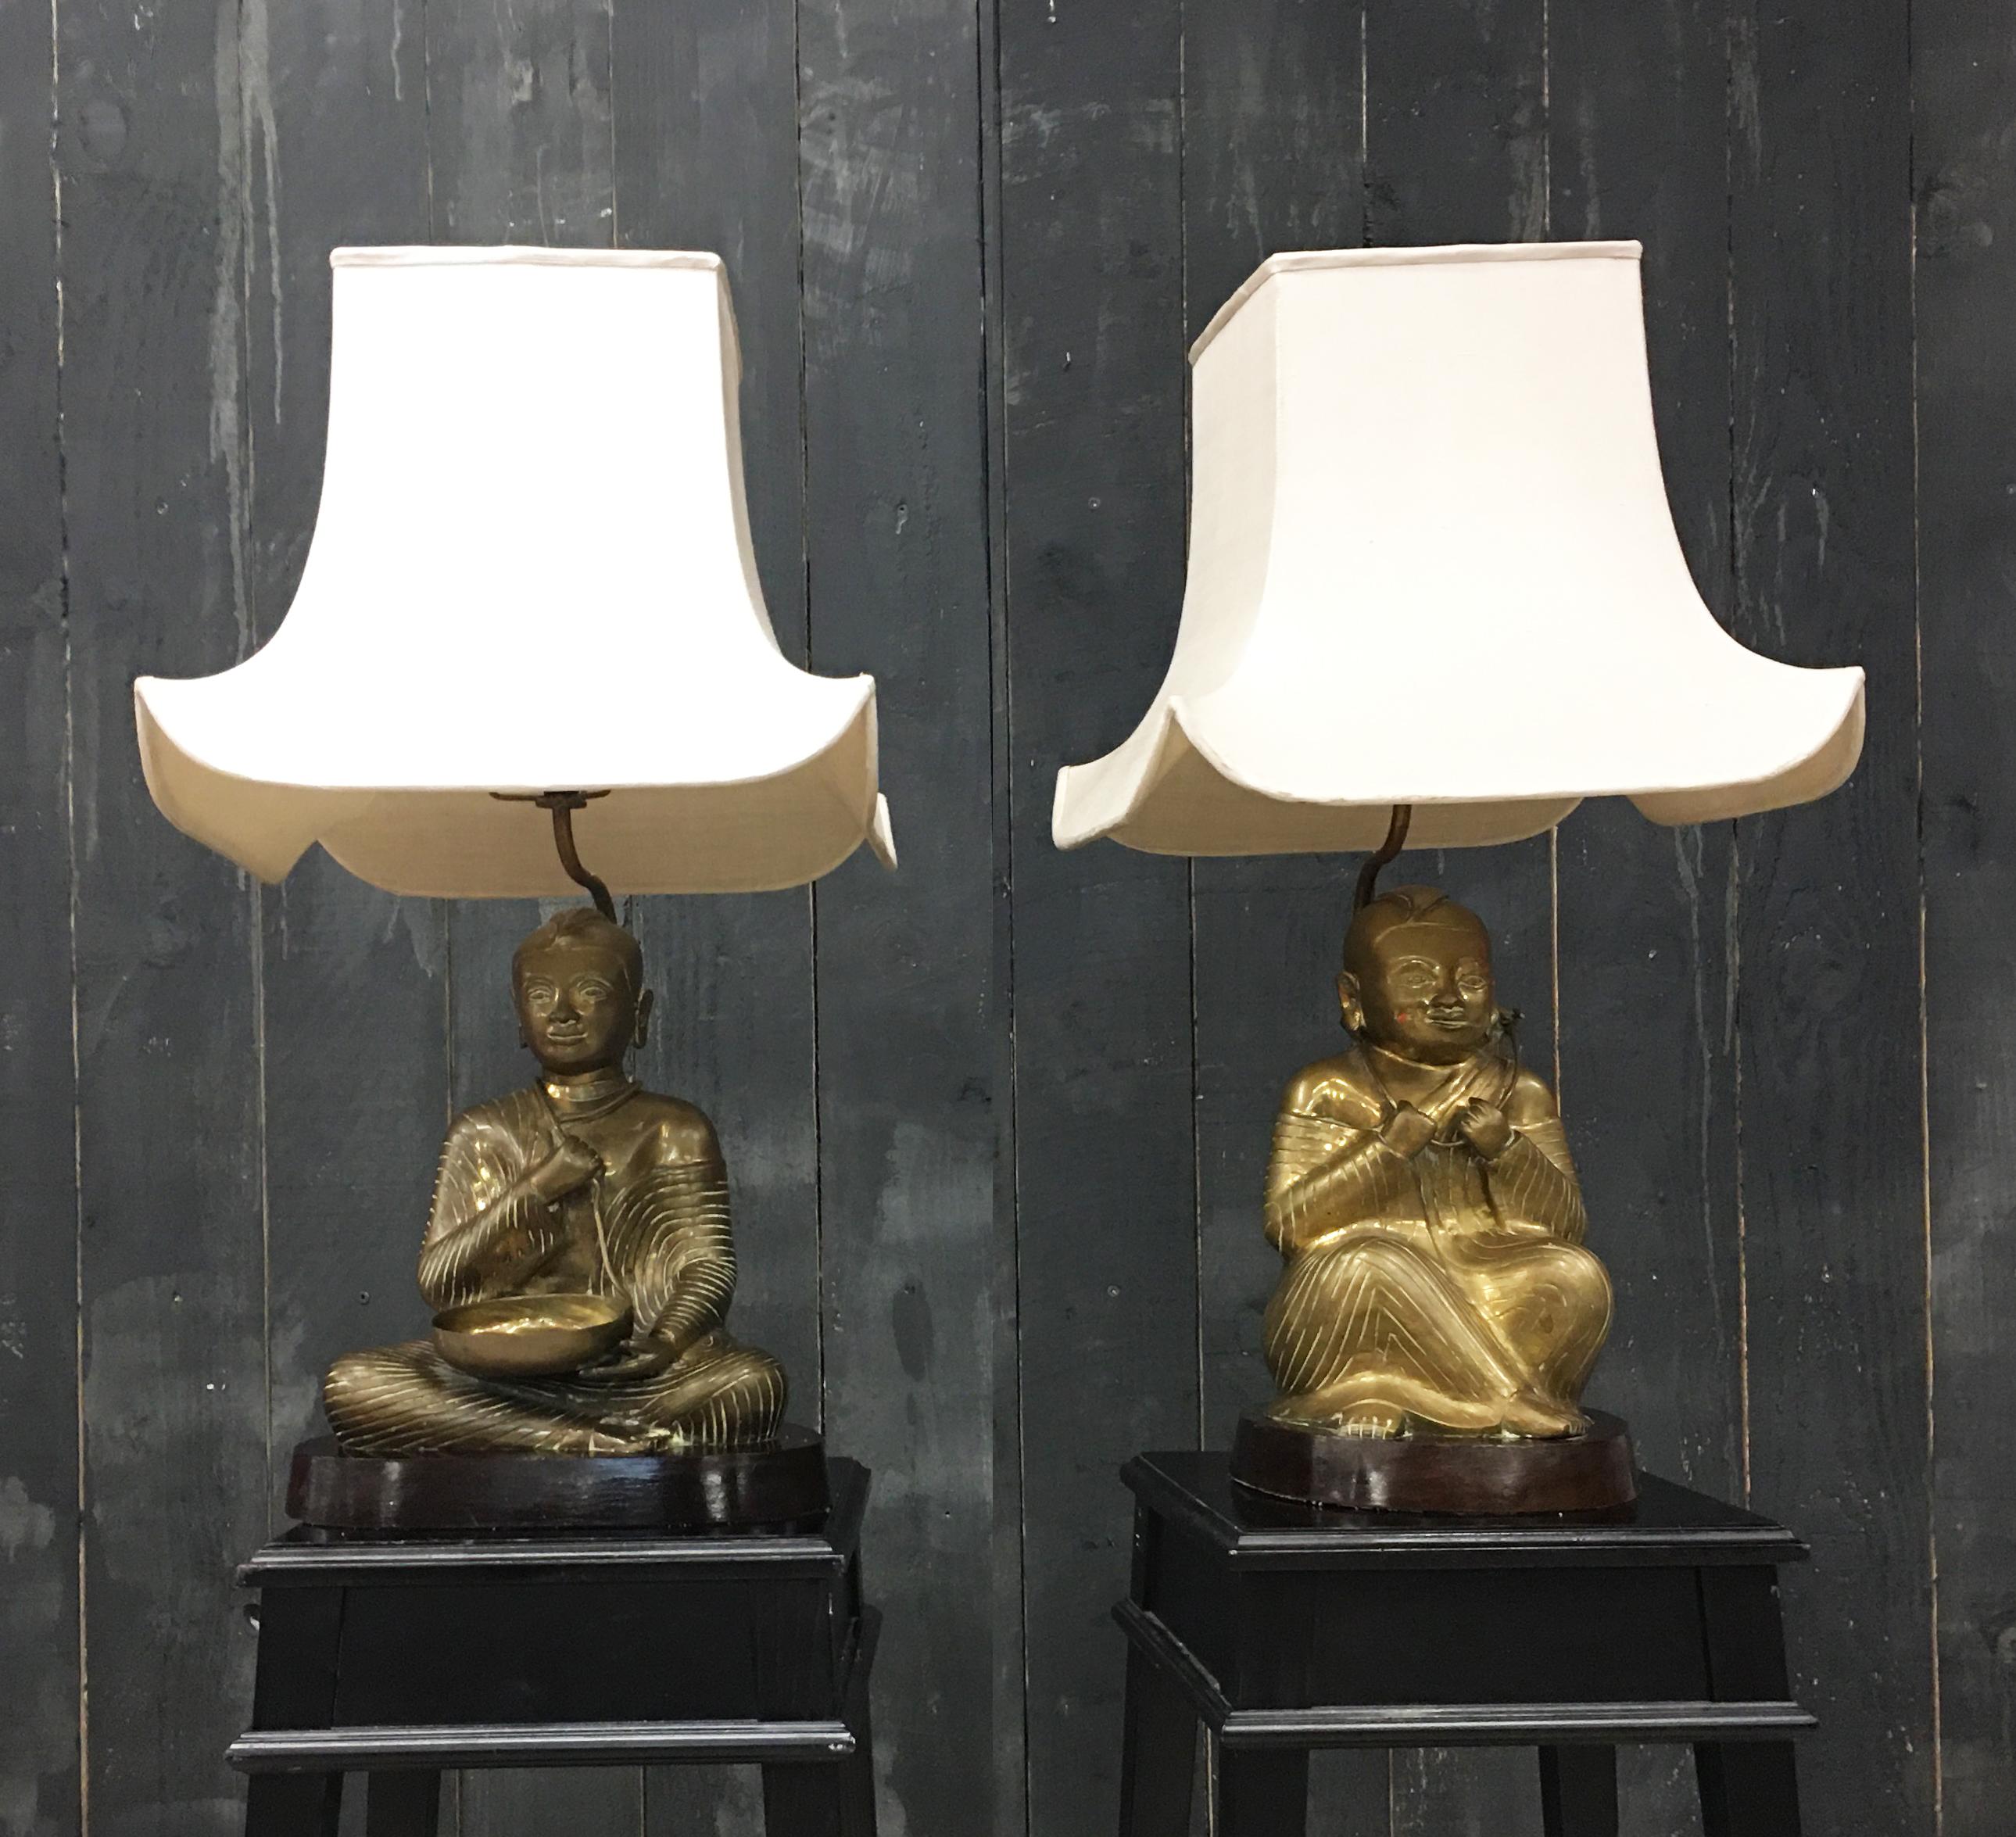 2 Bronze lamps circa 1960/1970;
2 Different models, lampshade in average condition;
The price is for one lamp.